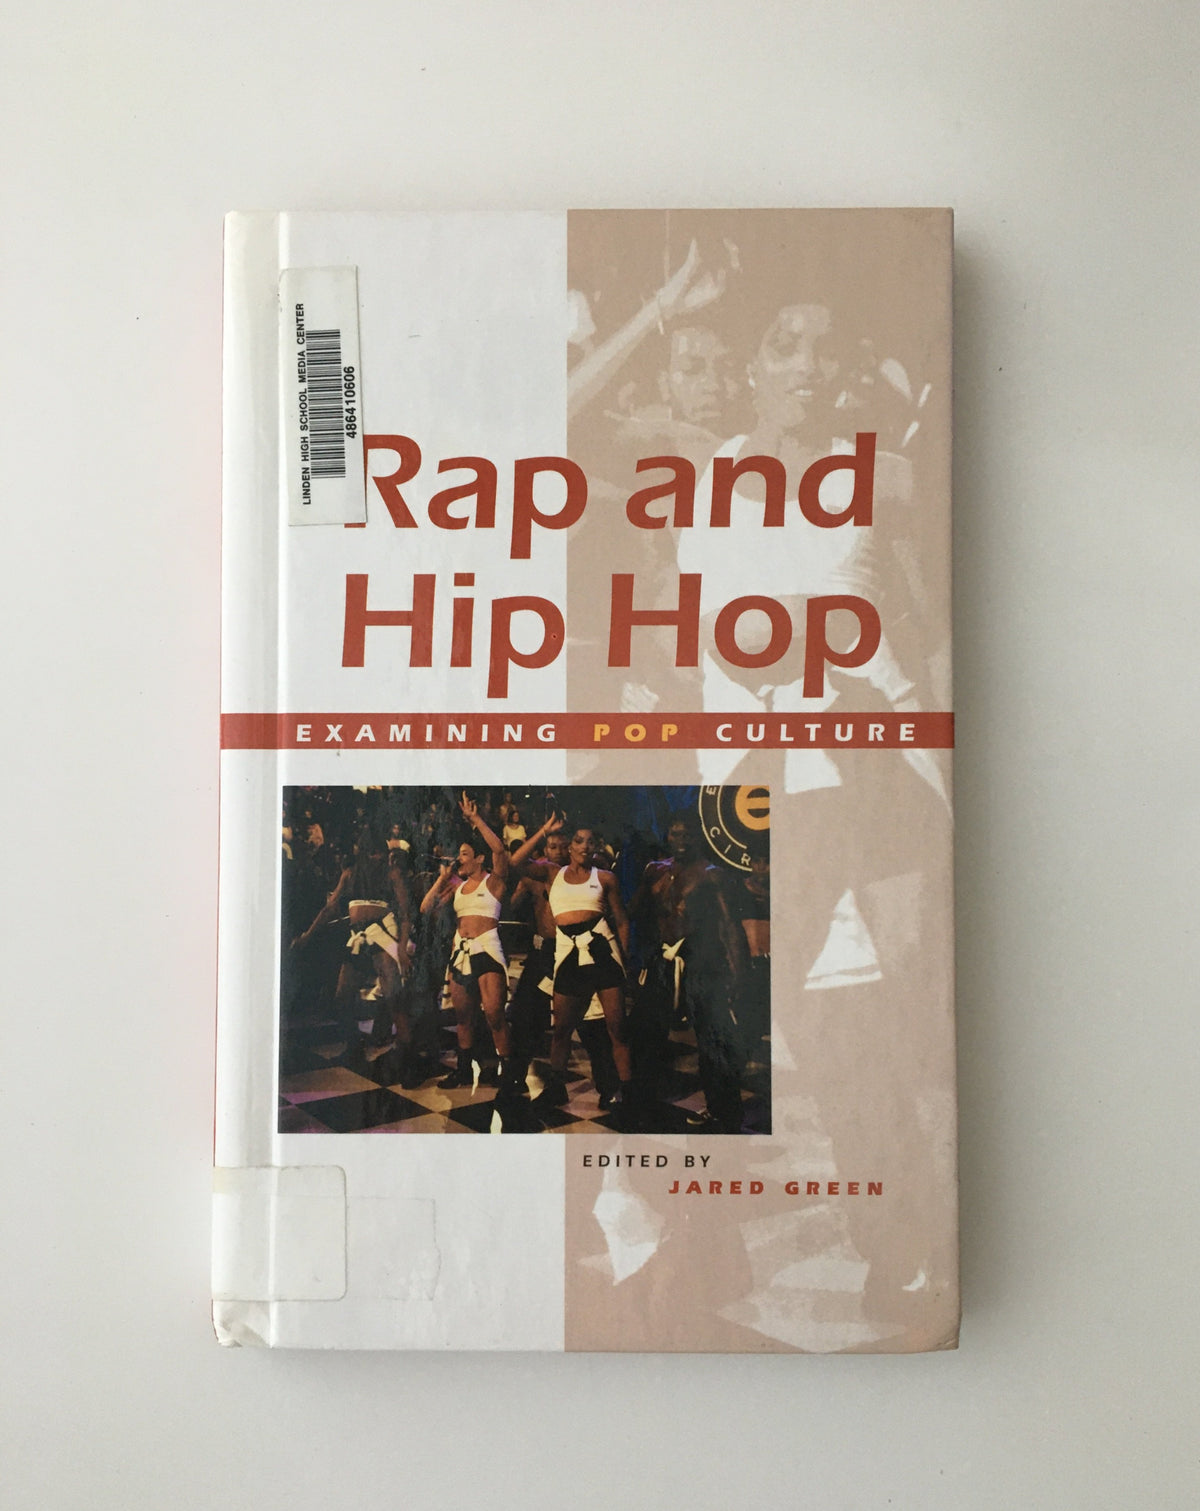 Rap and Hip Hop: Examining Pop Culture edited by Jared Green